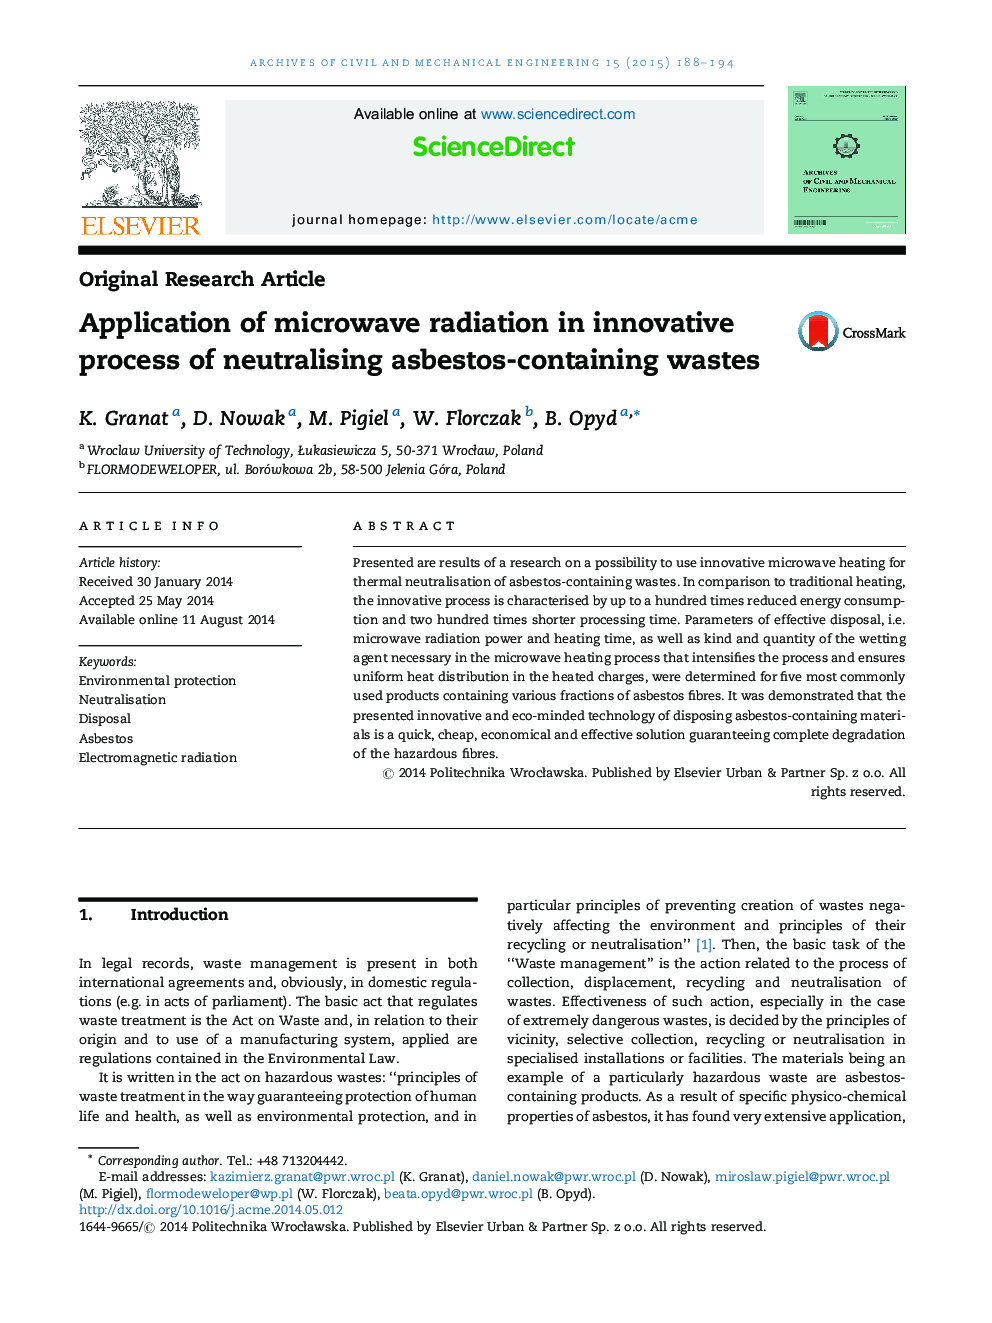 Application of microwave radiation in innovative process of neutralising asbestos-containing wastes